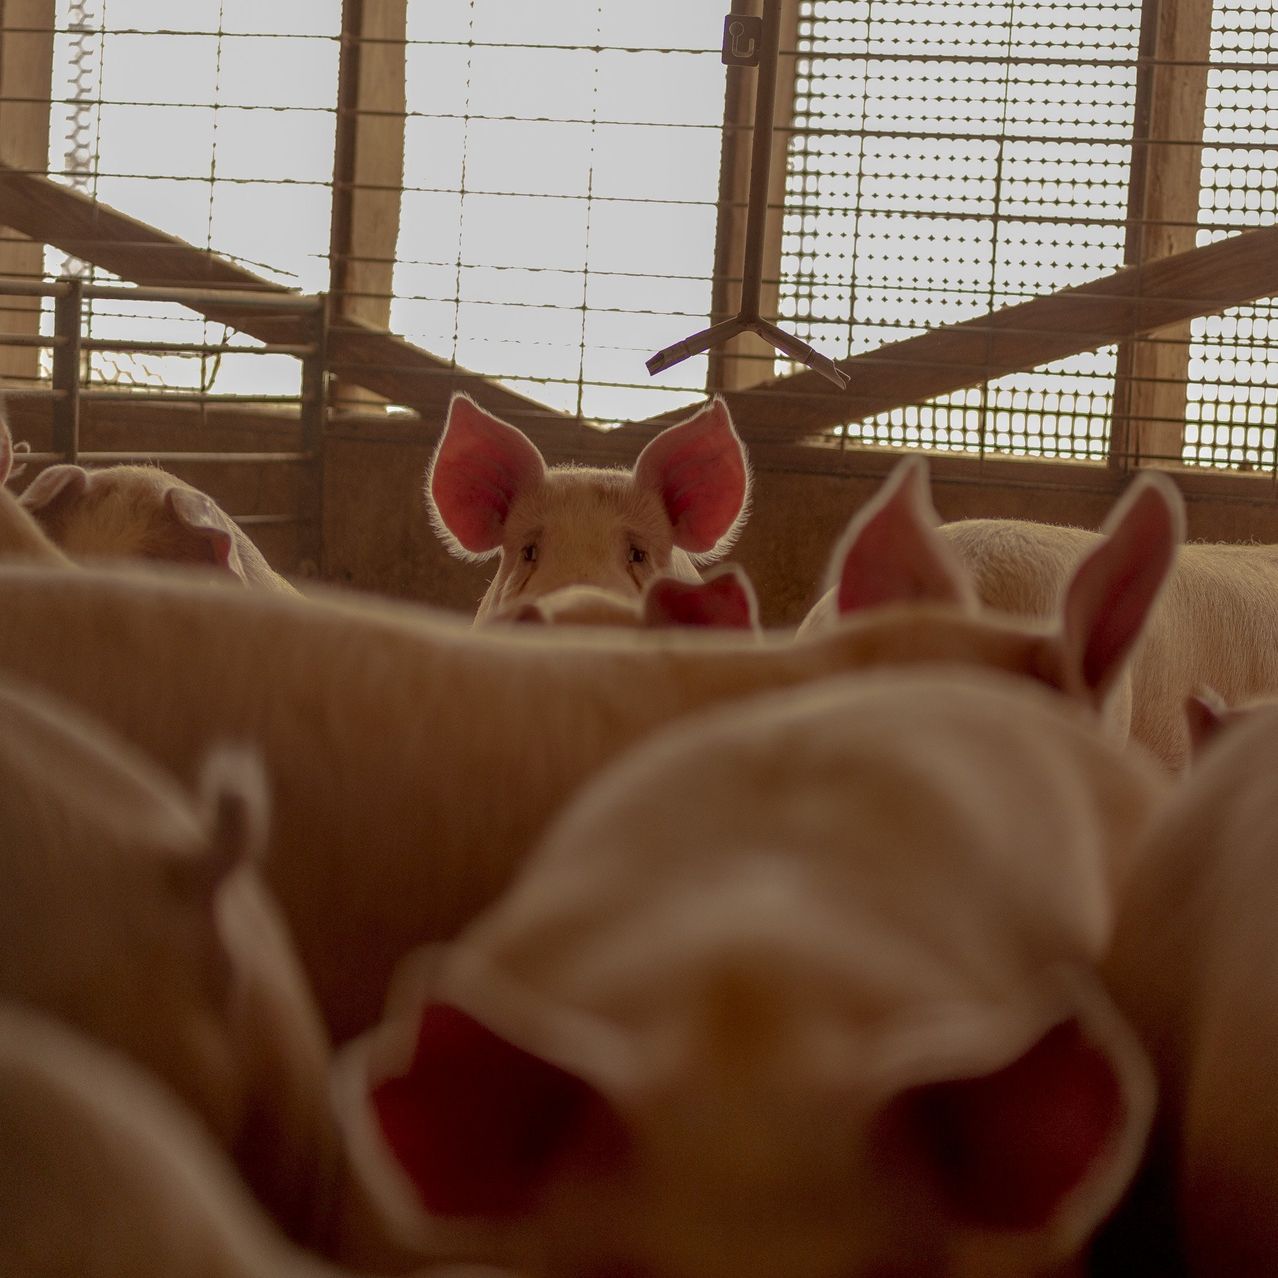 Farmers lost an average of about $30 a pig last year, according to estimates from Iowa State University.